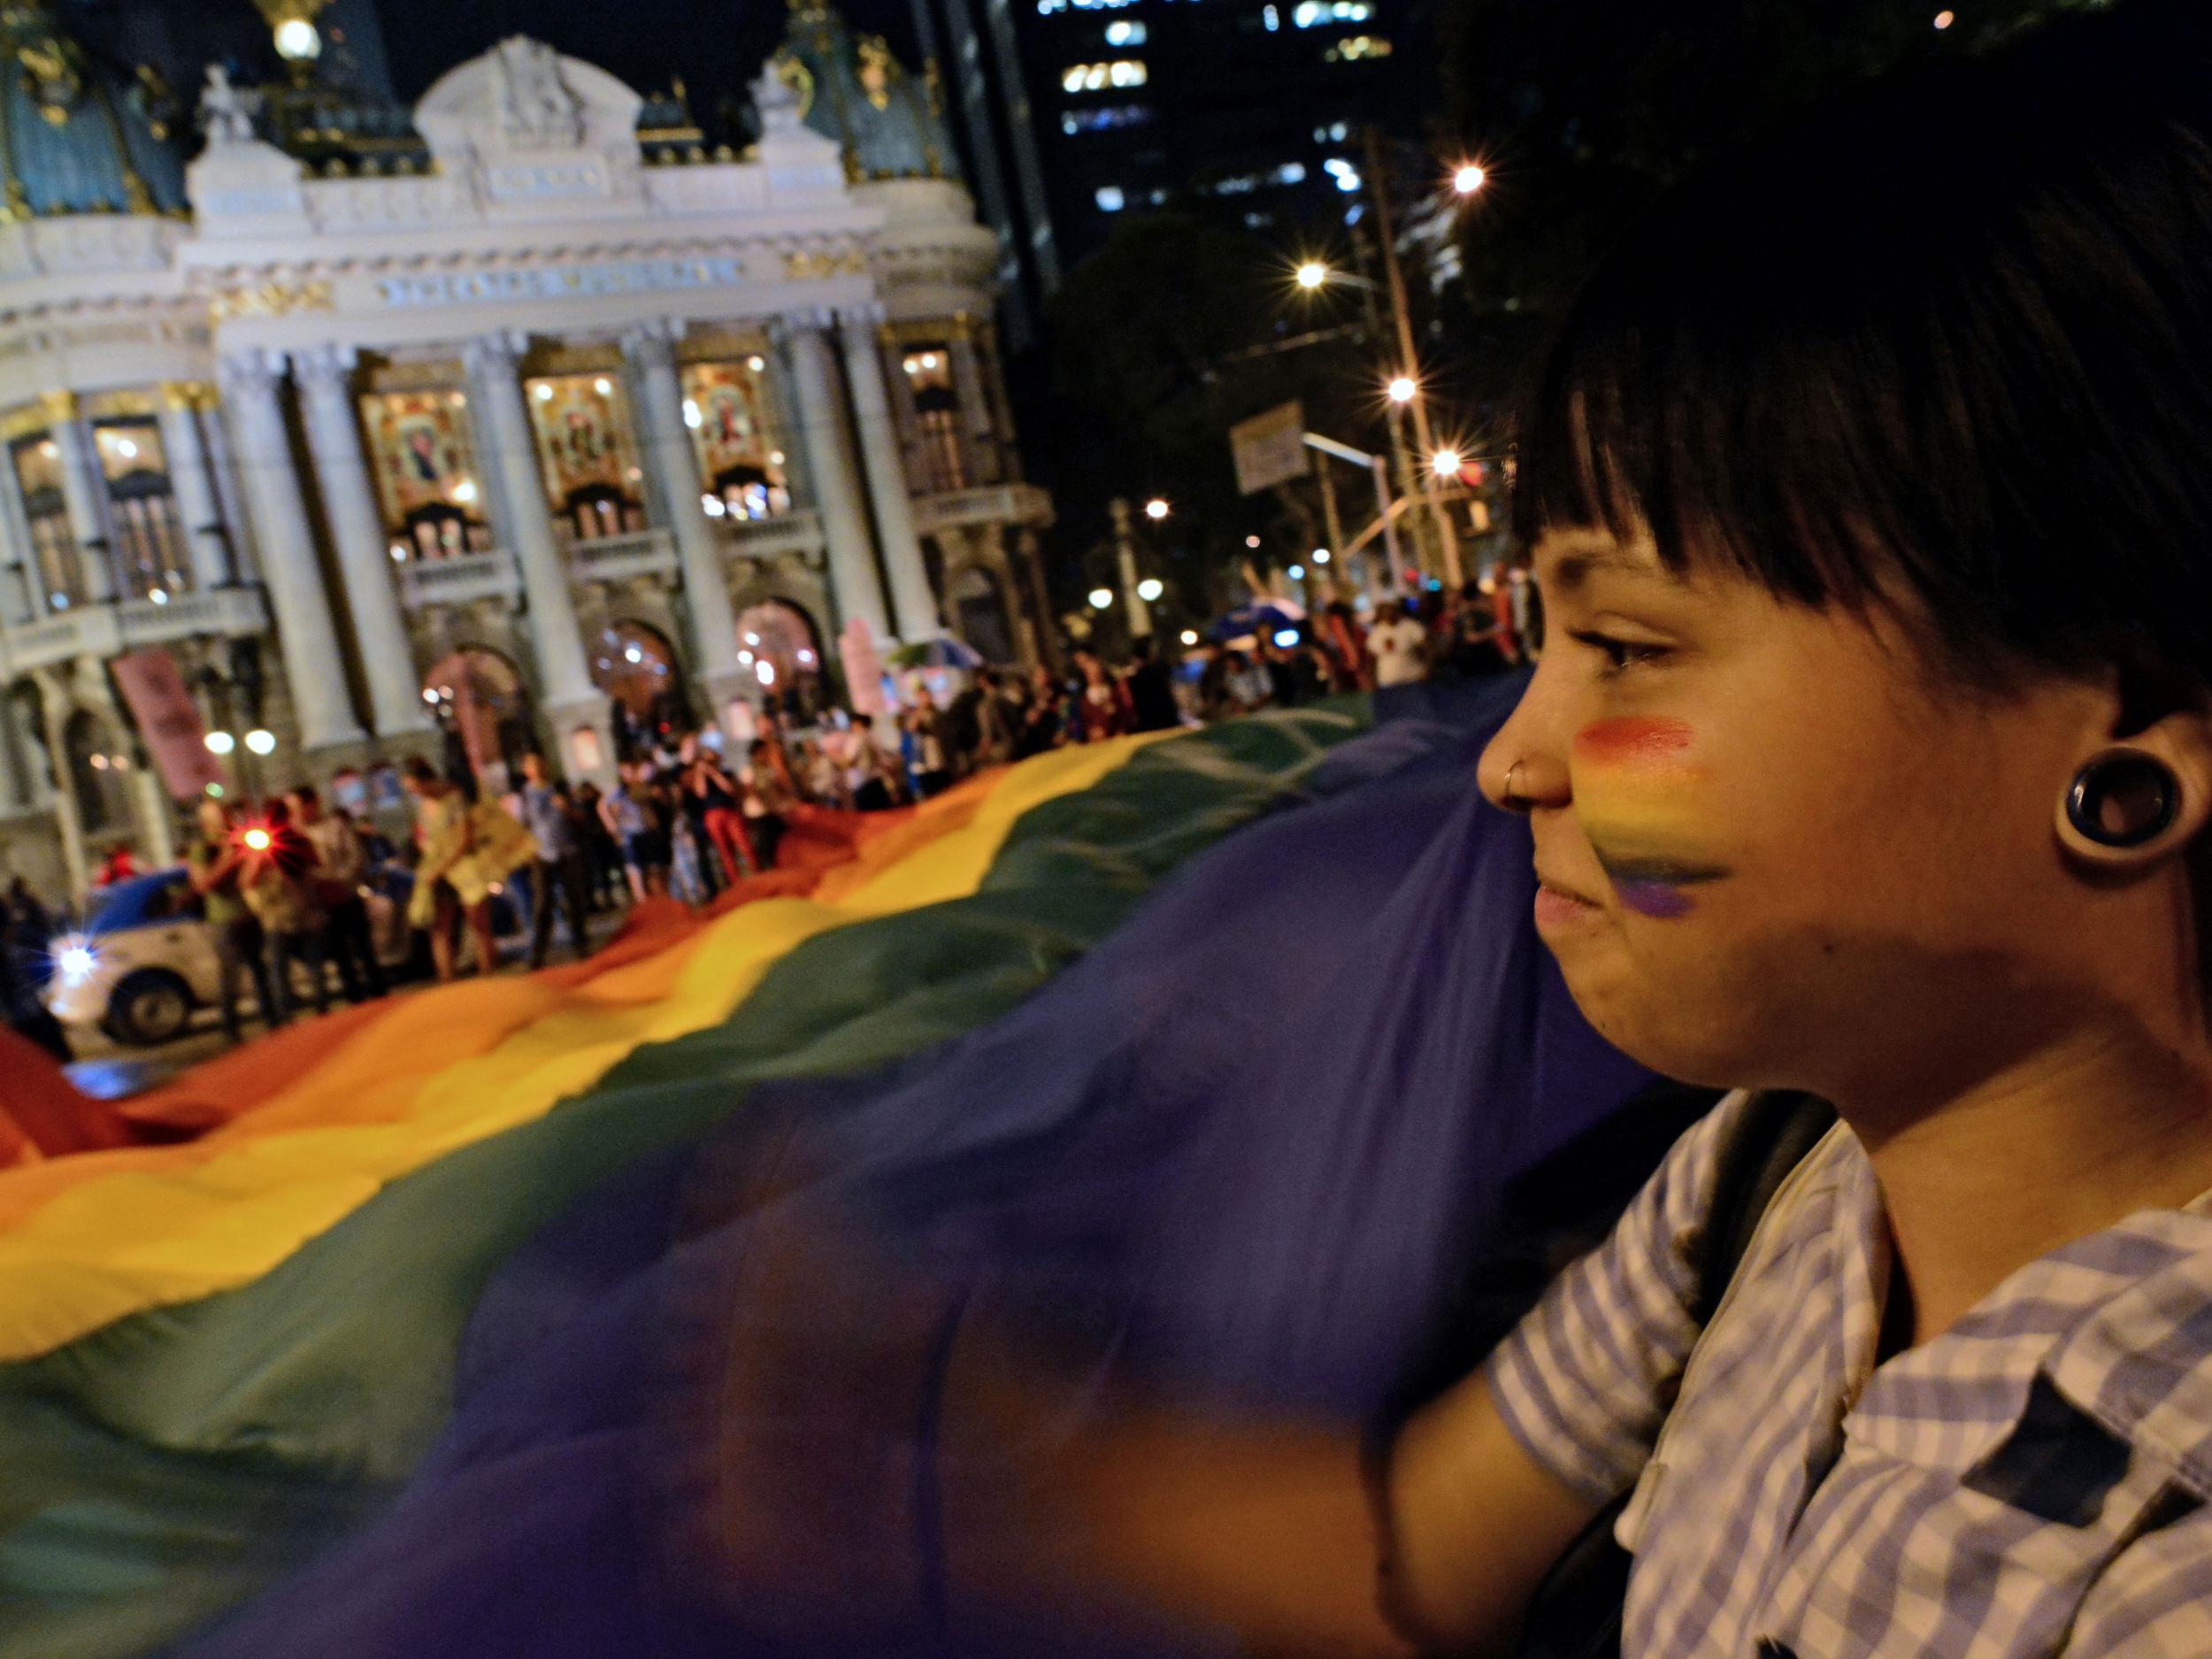 File photo shows Brazilians protesting against anti-LGBT measures